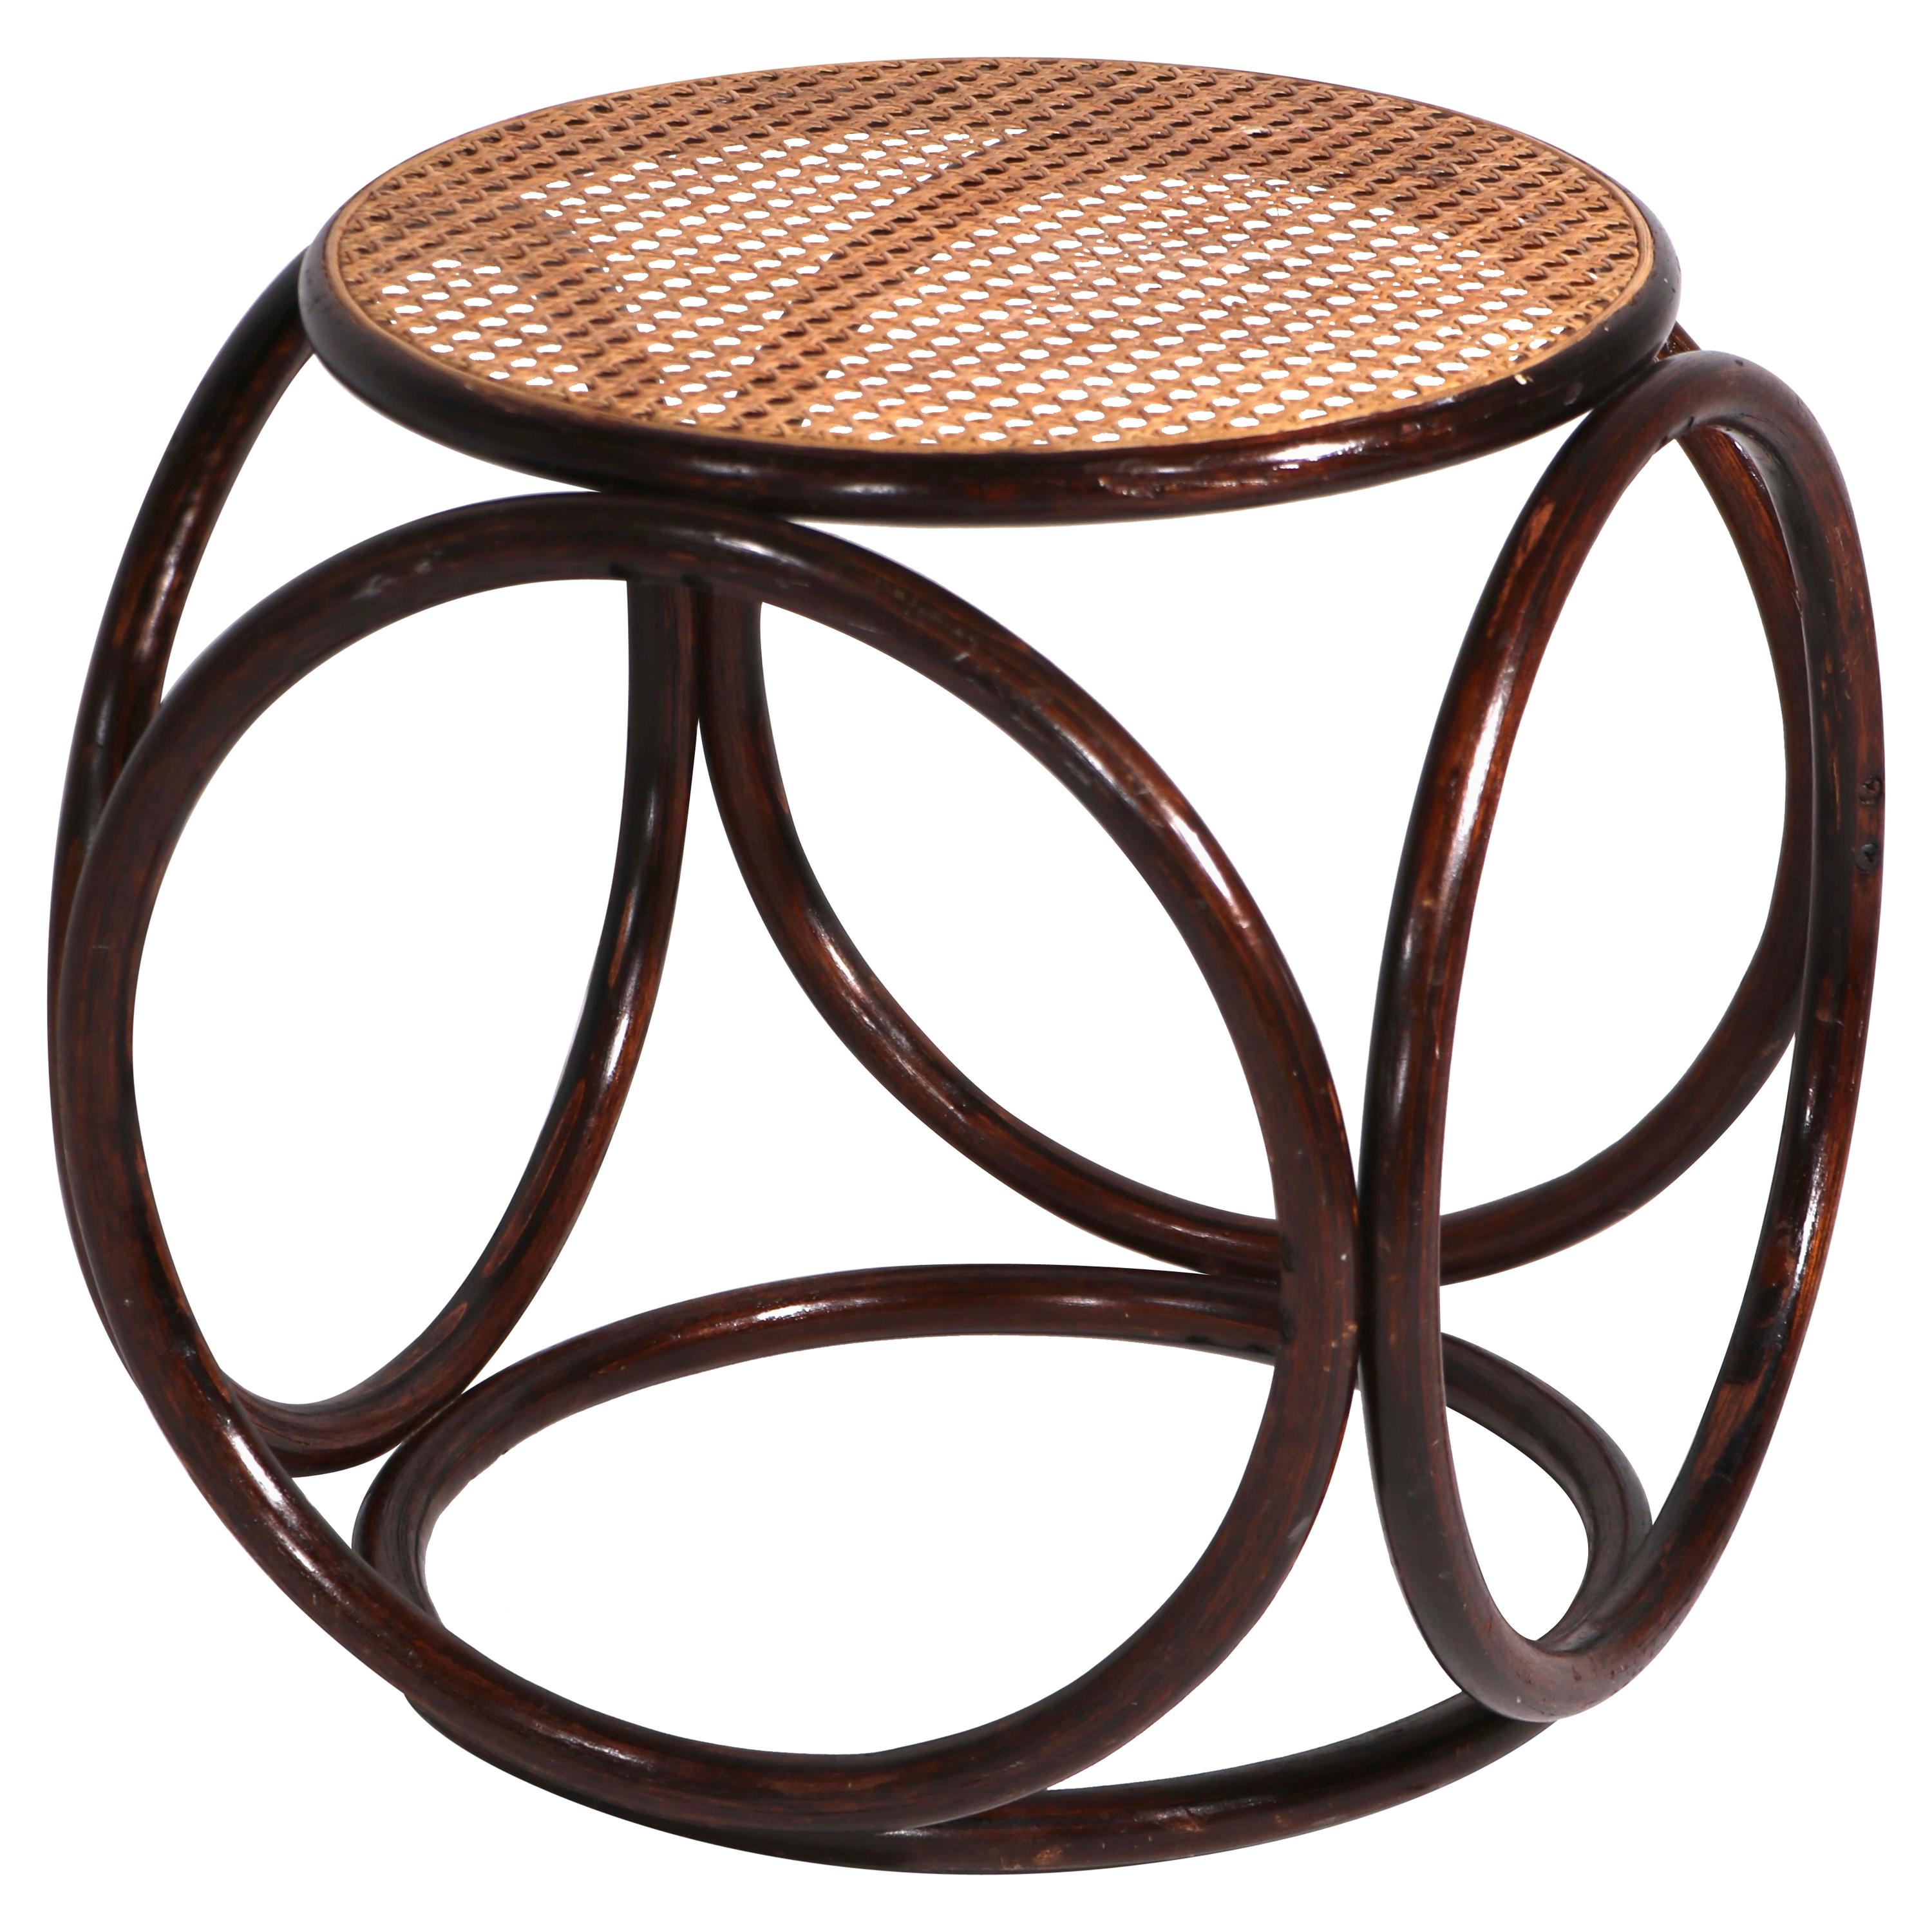 Circular Thonet Ottoman Stool of Bentwood and Cane